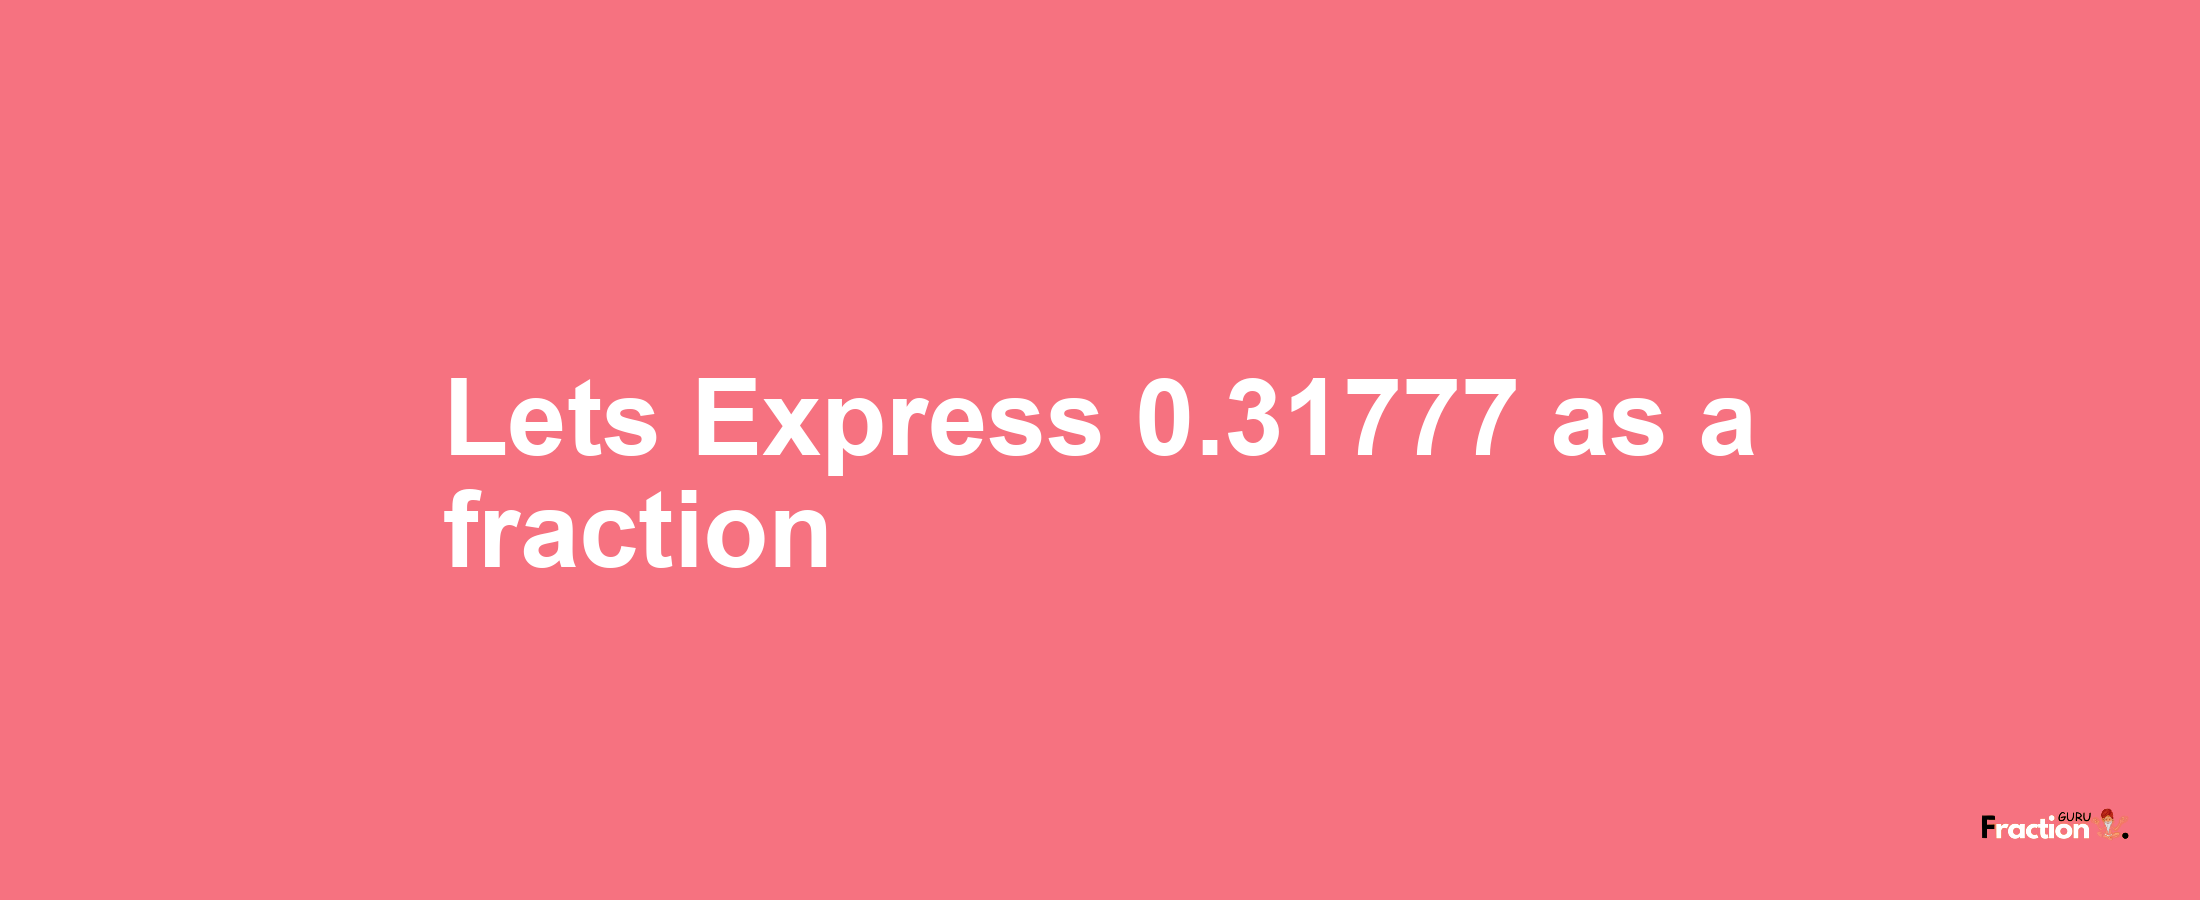 Lets Express 0.31777 as afraction